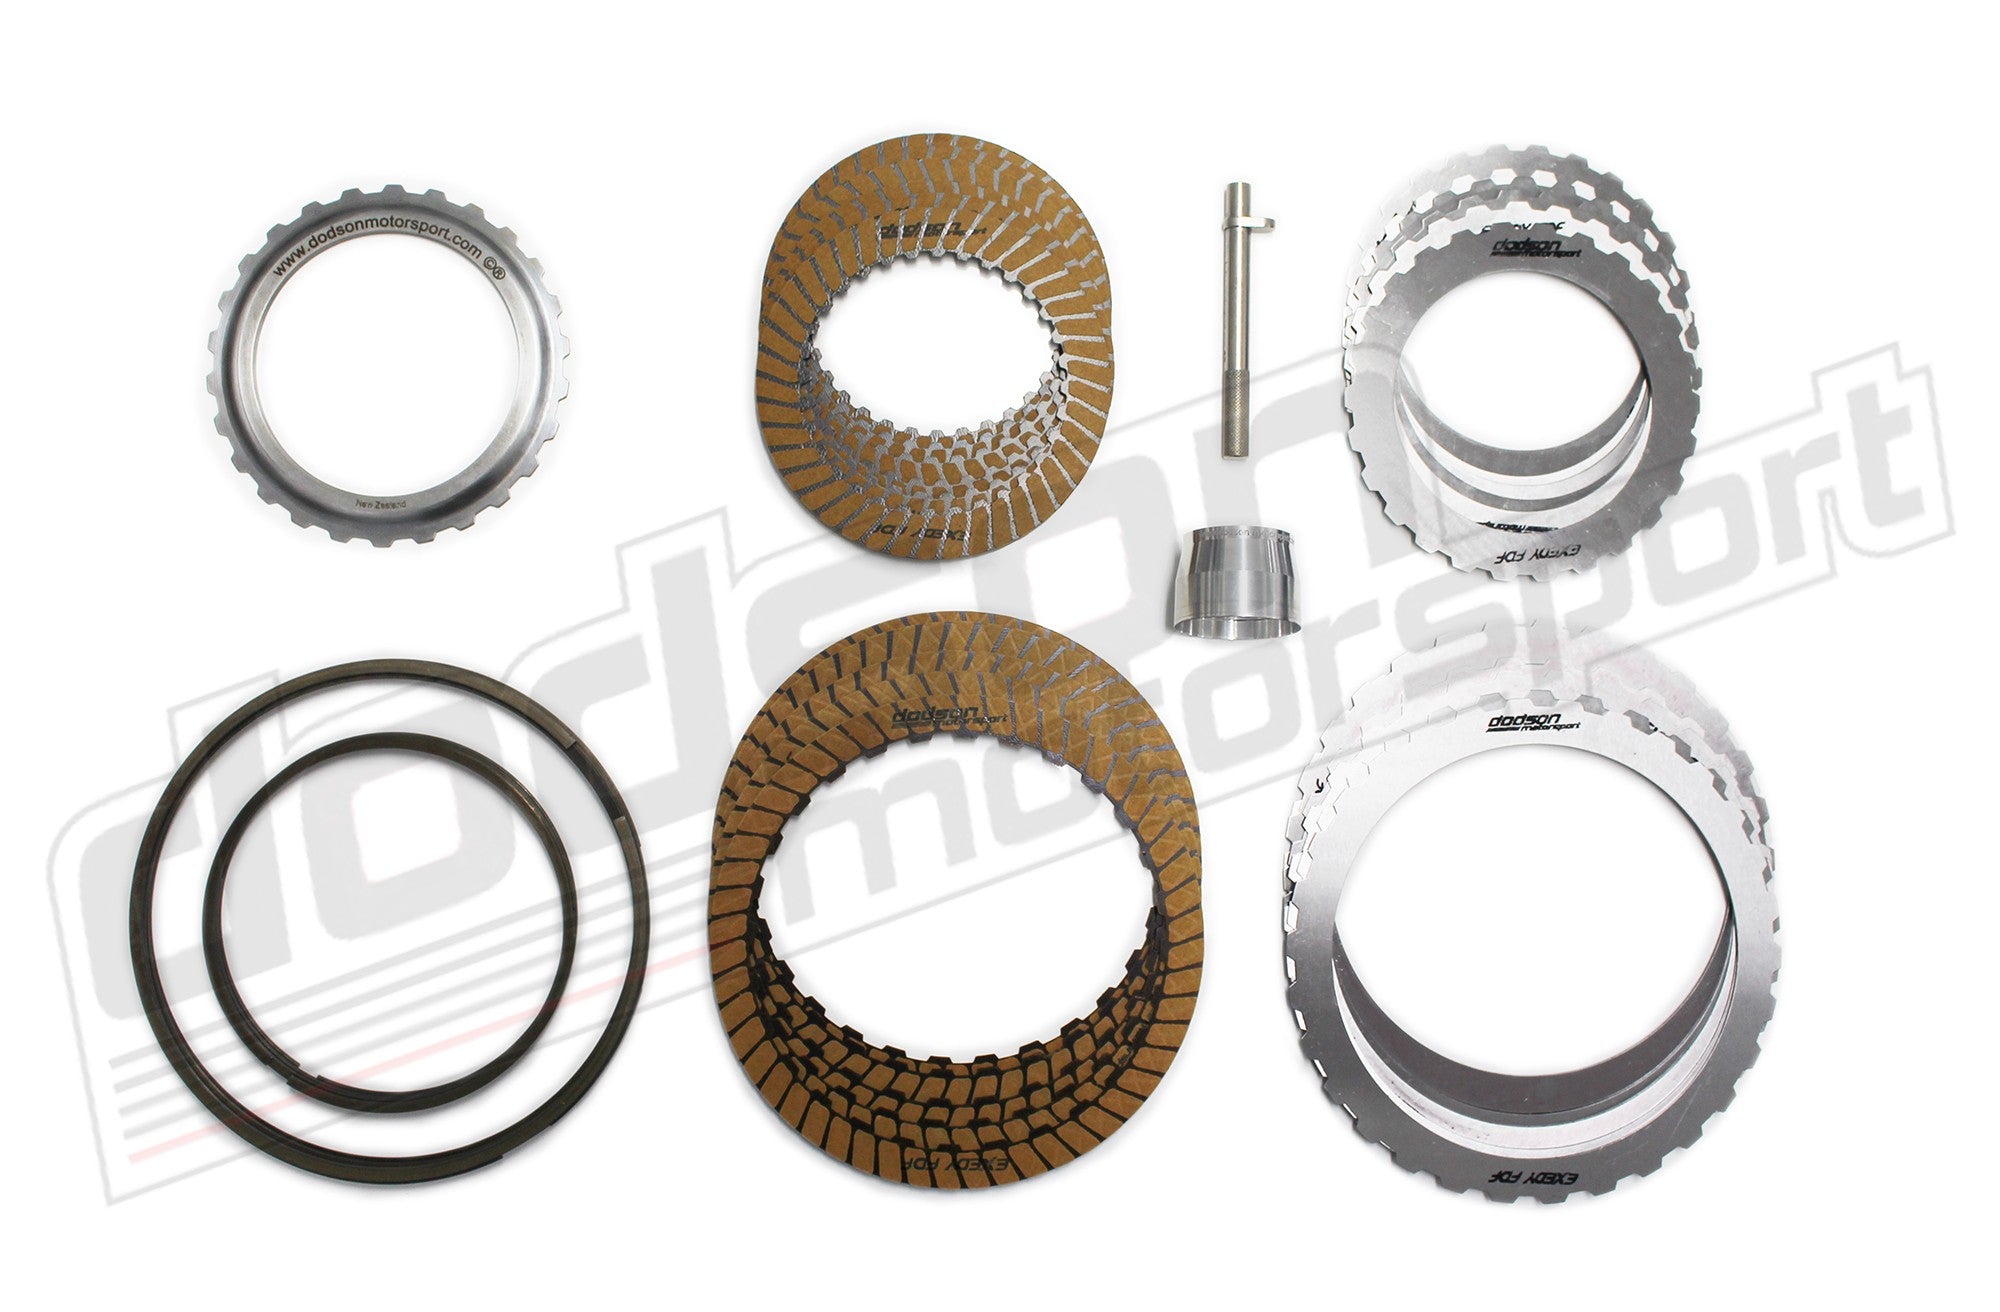 DODSON DMS-8052 Clutch kit SUPERSTOCK 6/7 for VW, AUDI (DQ250 gearbox) Photo-0 